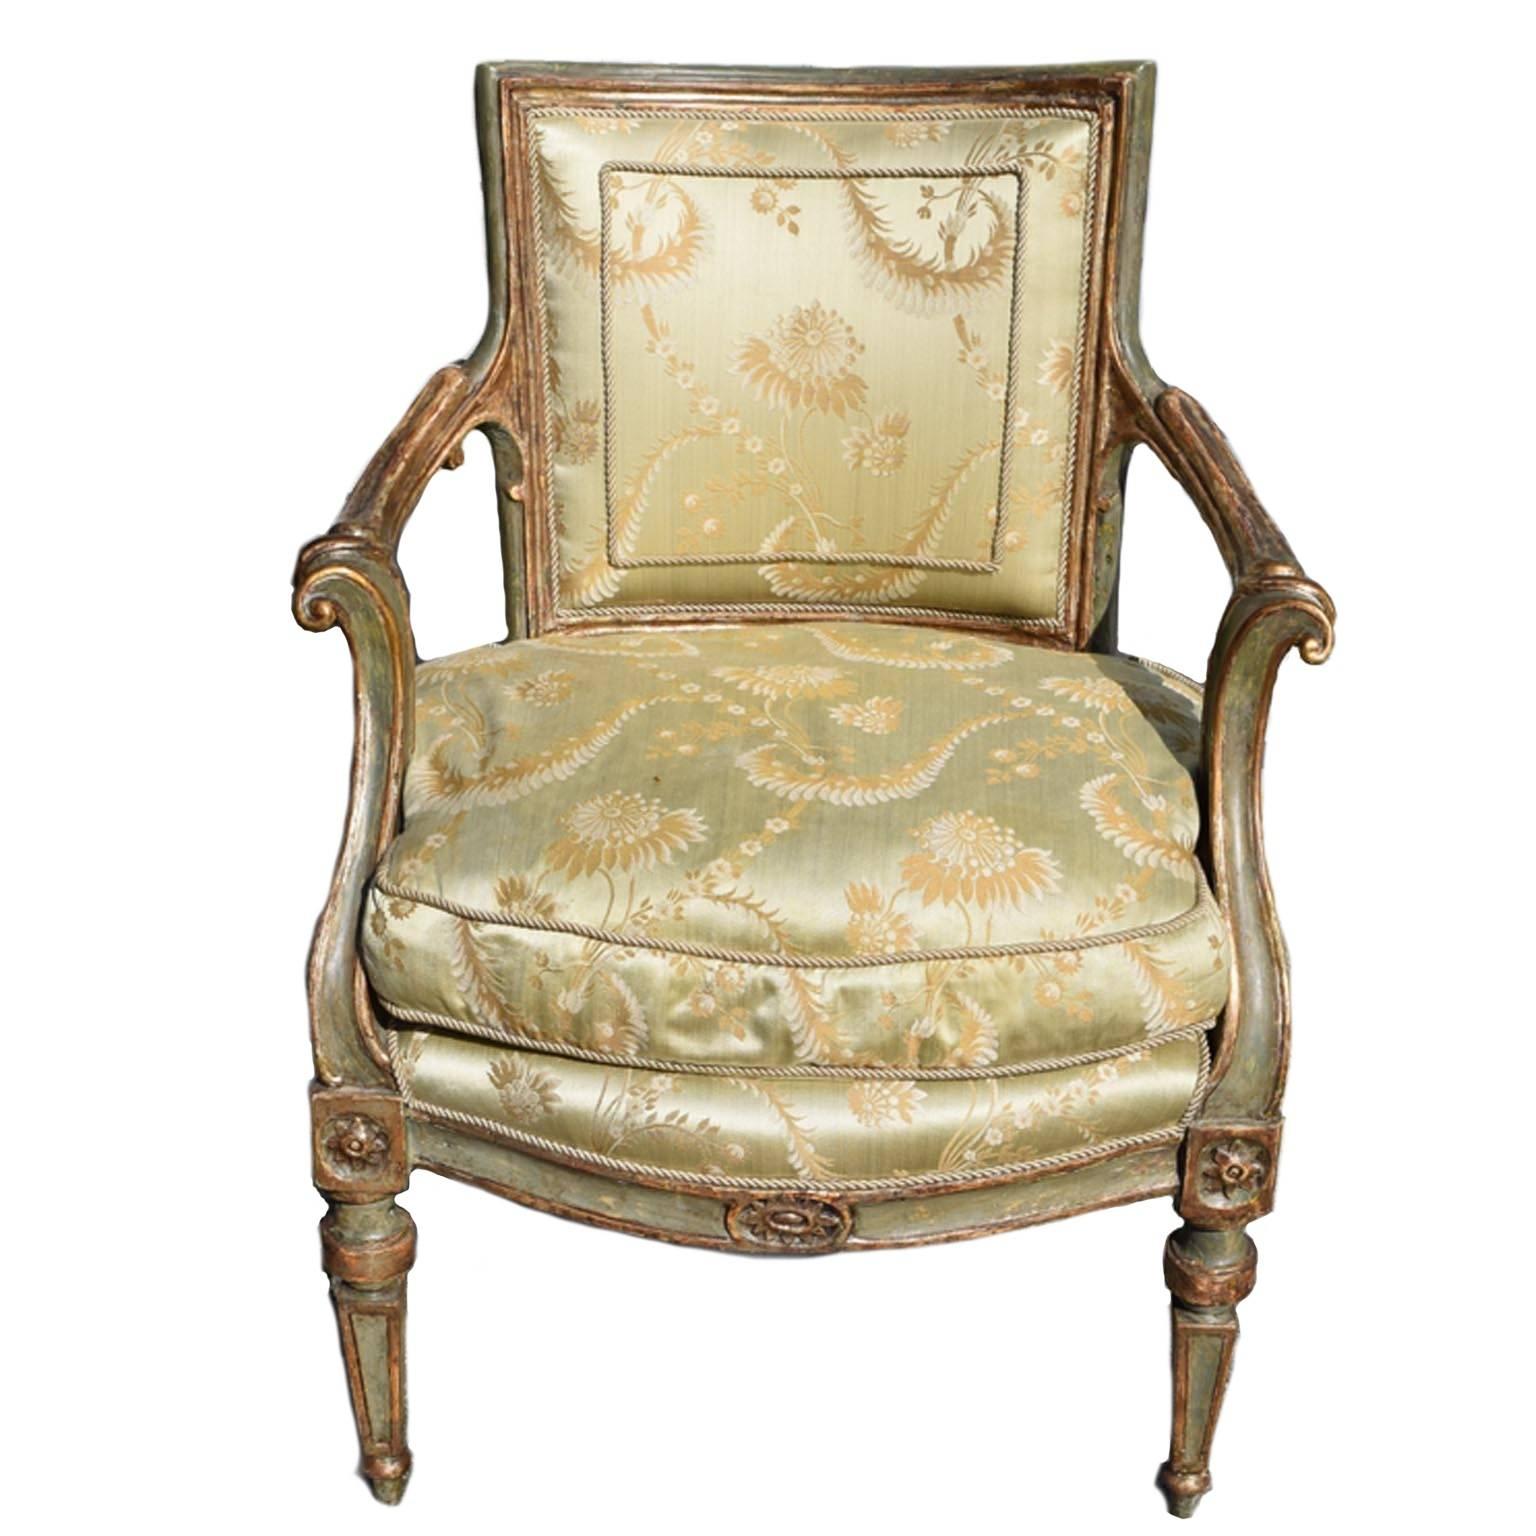 Italian green-painted and parcel-gilt neoclassical armchair has a bowed
rectangular backrest within a moulded border, circa 1780.

Chair has scrolled armrests raised on tapering fluted supports, above a bowed loose cushion seat, raised on square